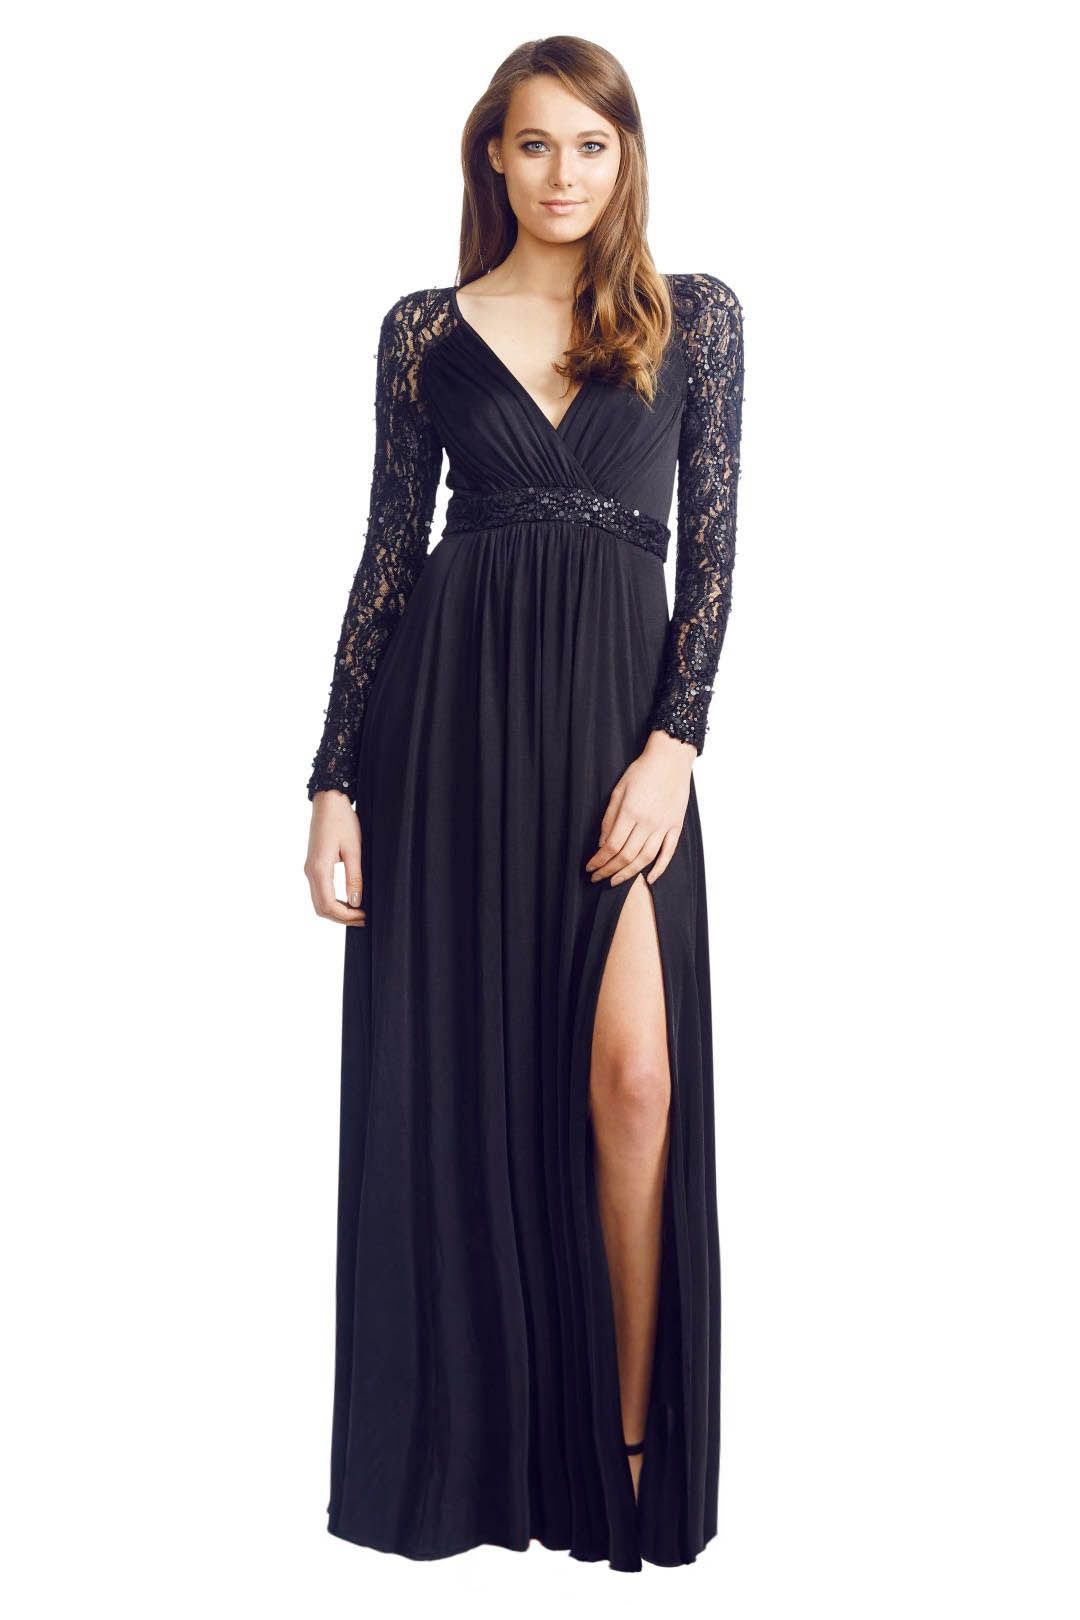 George - Julia Gown - Black - Front